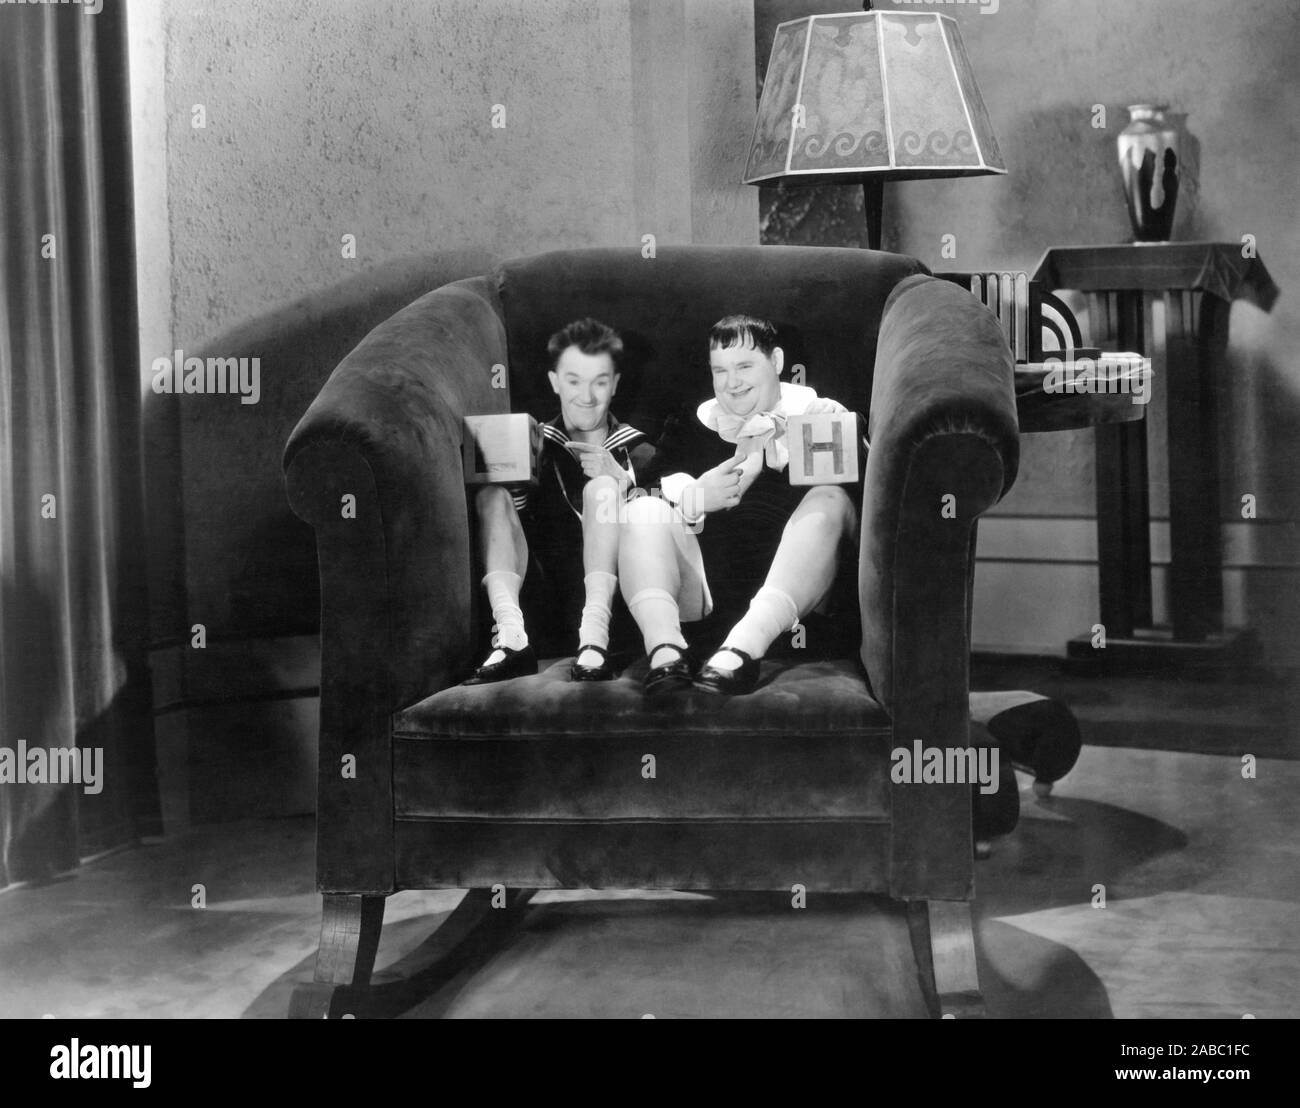 BRATS, from left: Stan Laurel, Oliver Hardy, 1930 Stock Photo